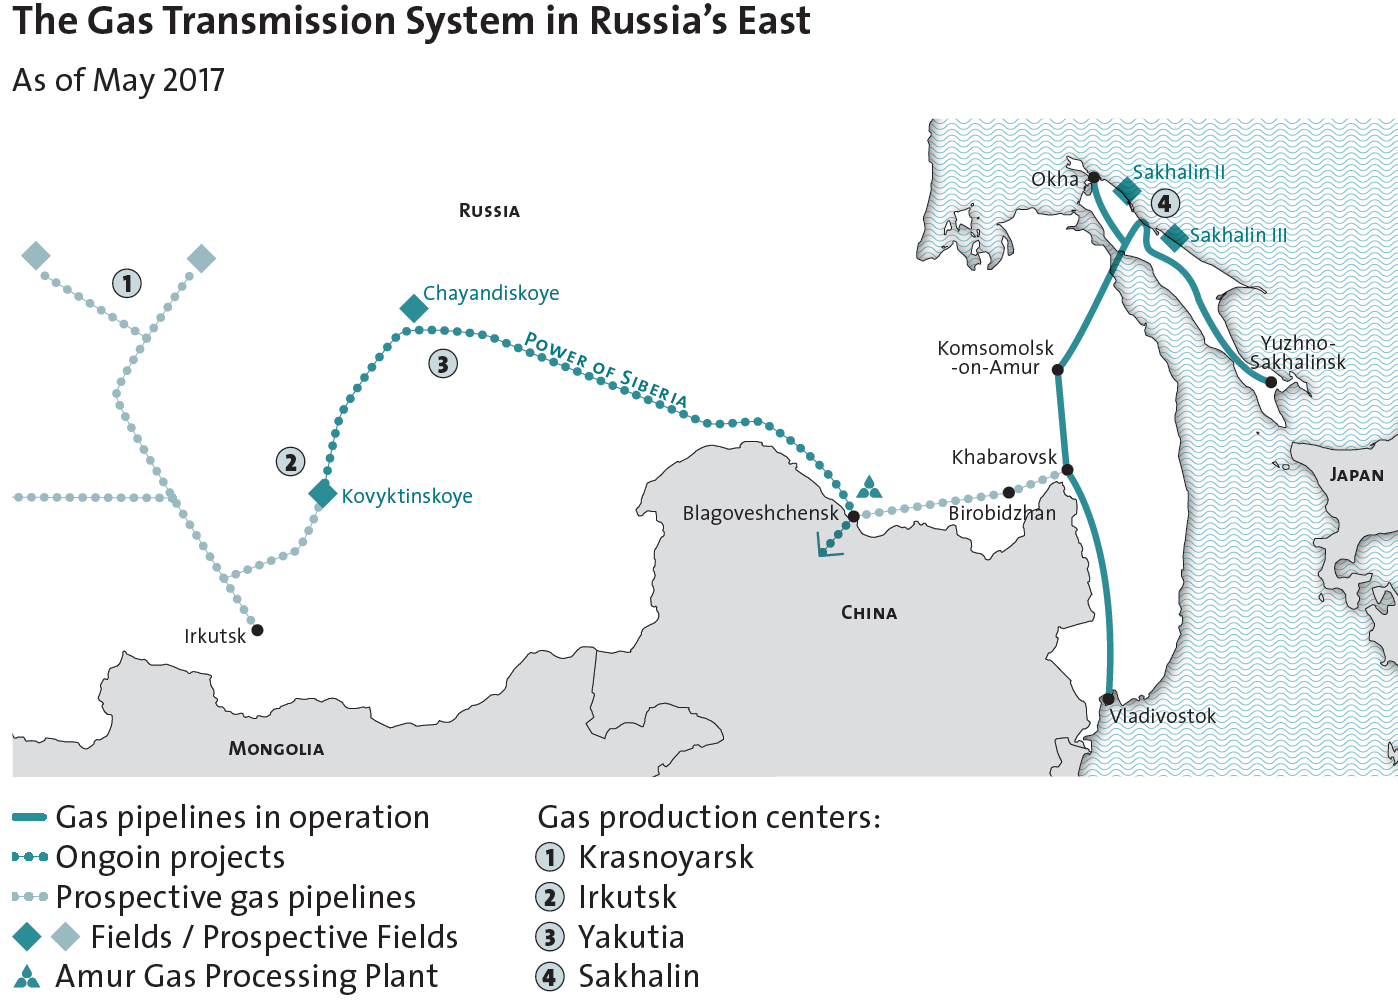 The Gas Transmission System in Russia’s East